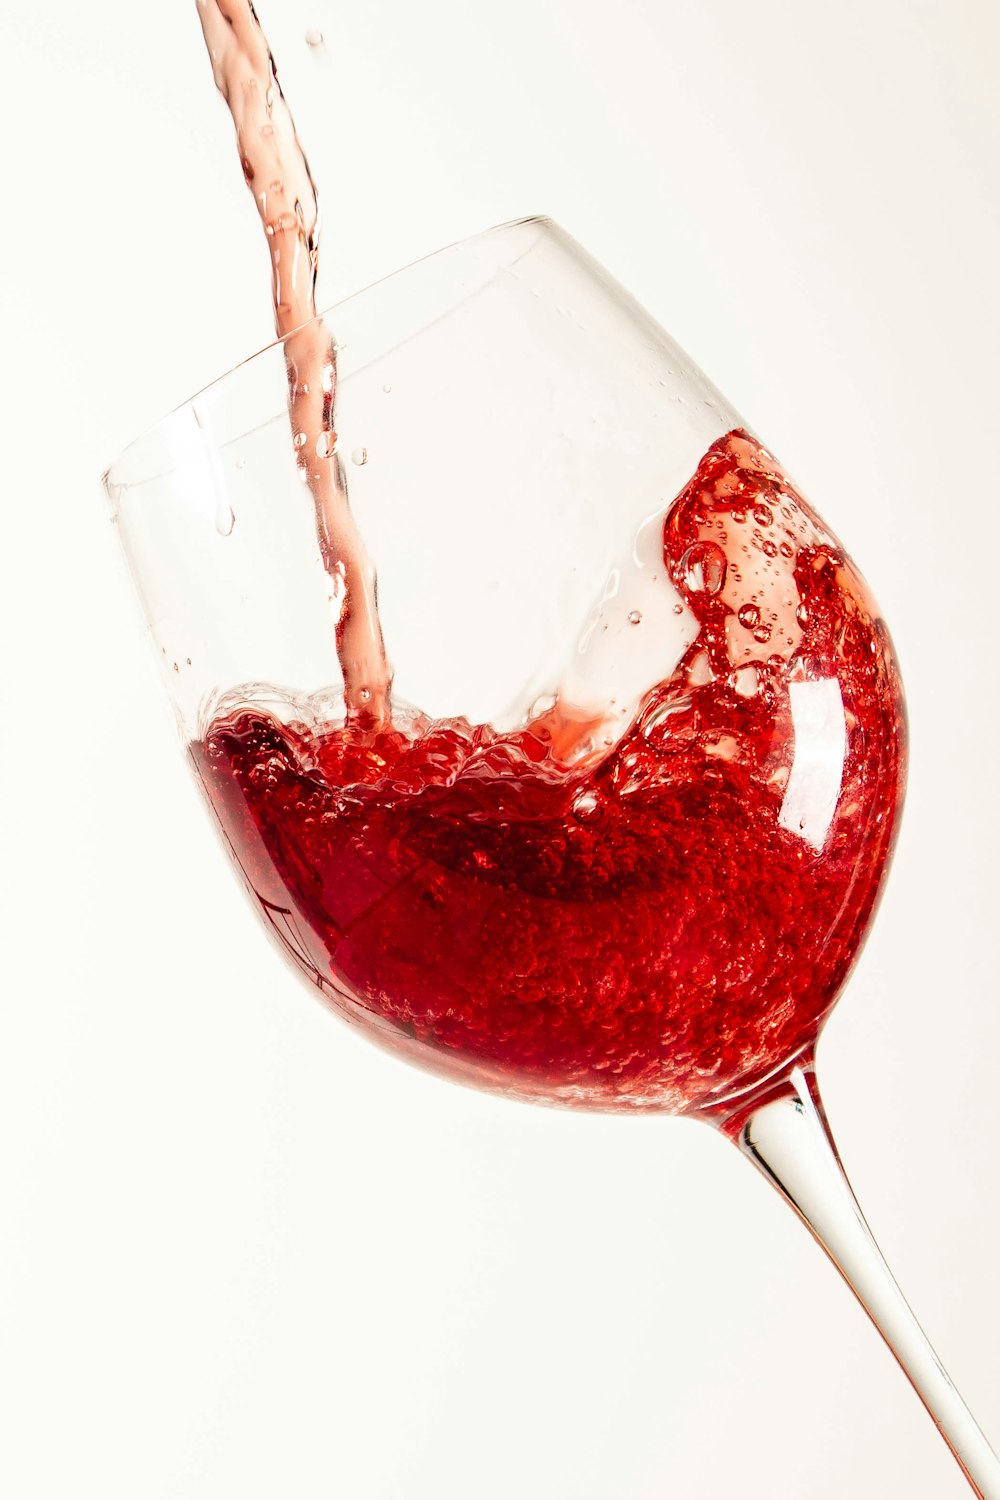 red wine in clear wine glass